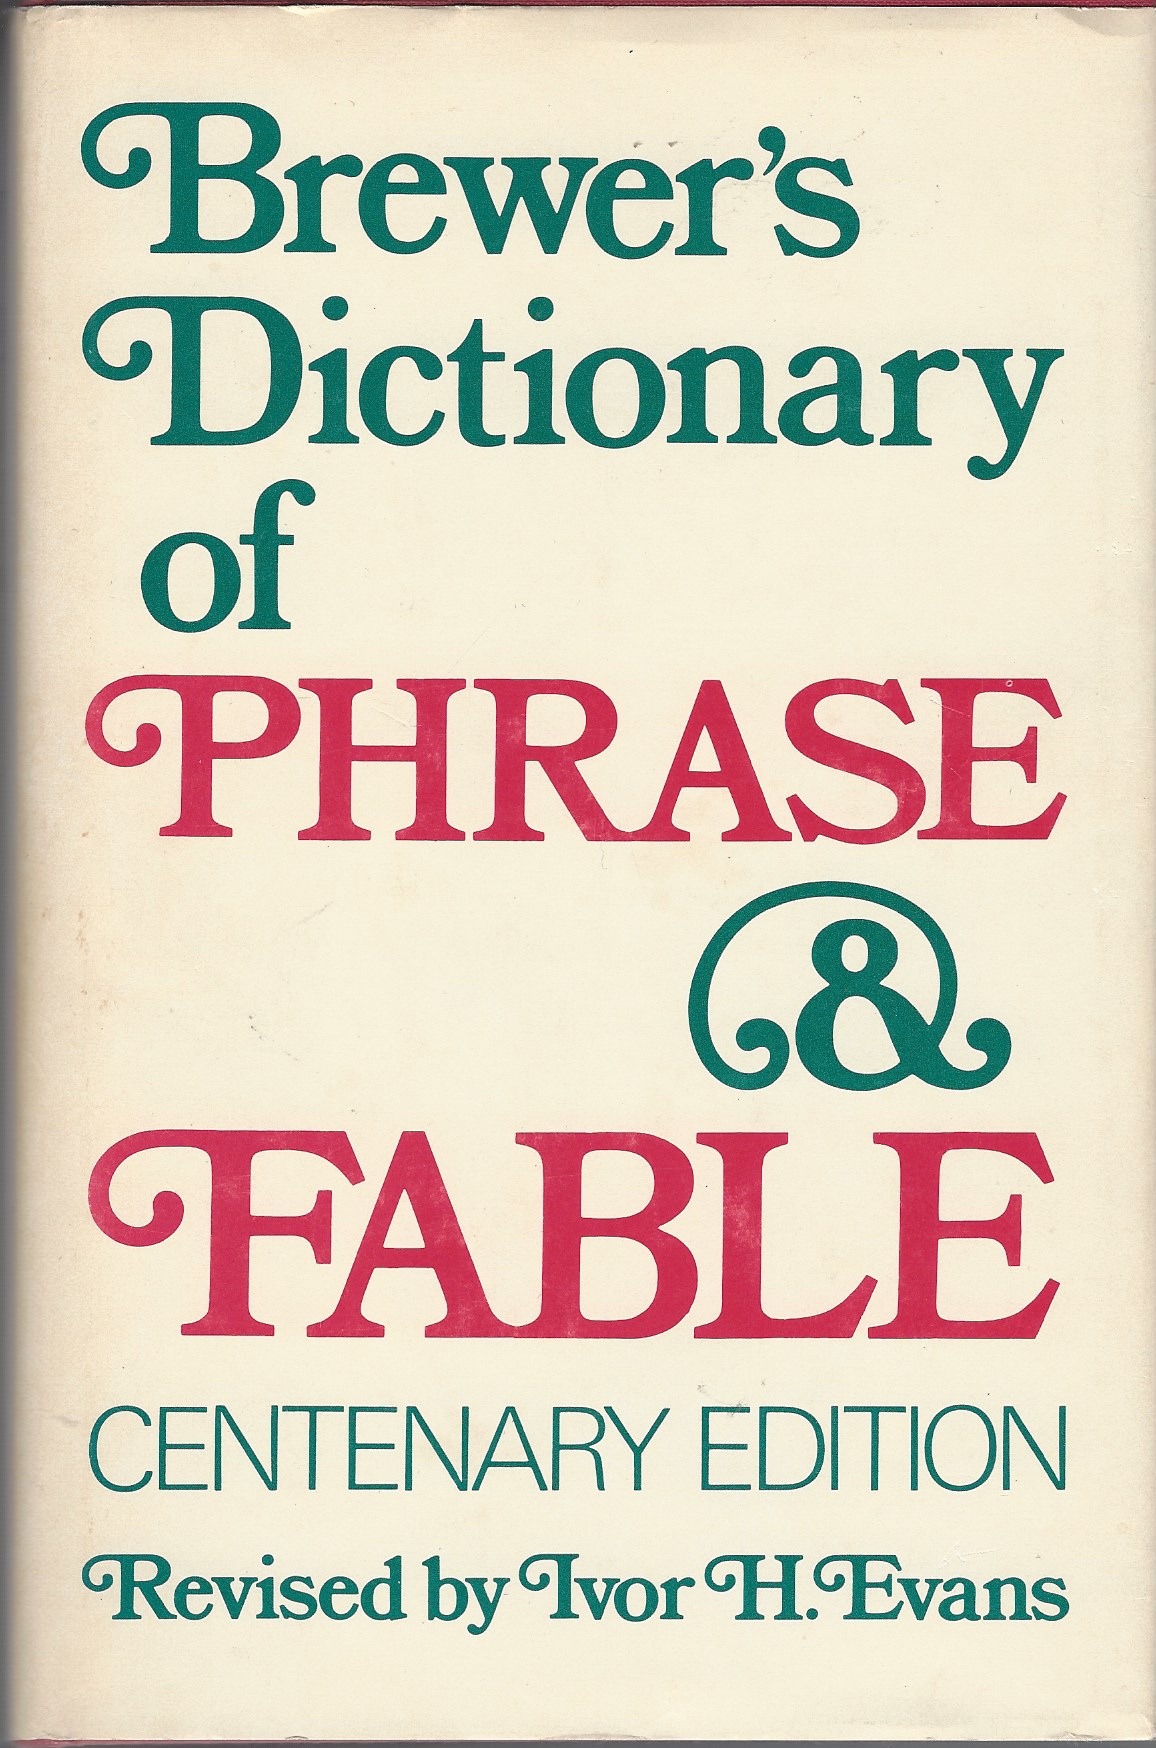 EVANS IVOR H. - Brewer's Dictionary of Phrase & Fable Centenary Edition